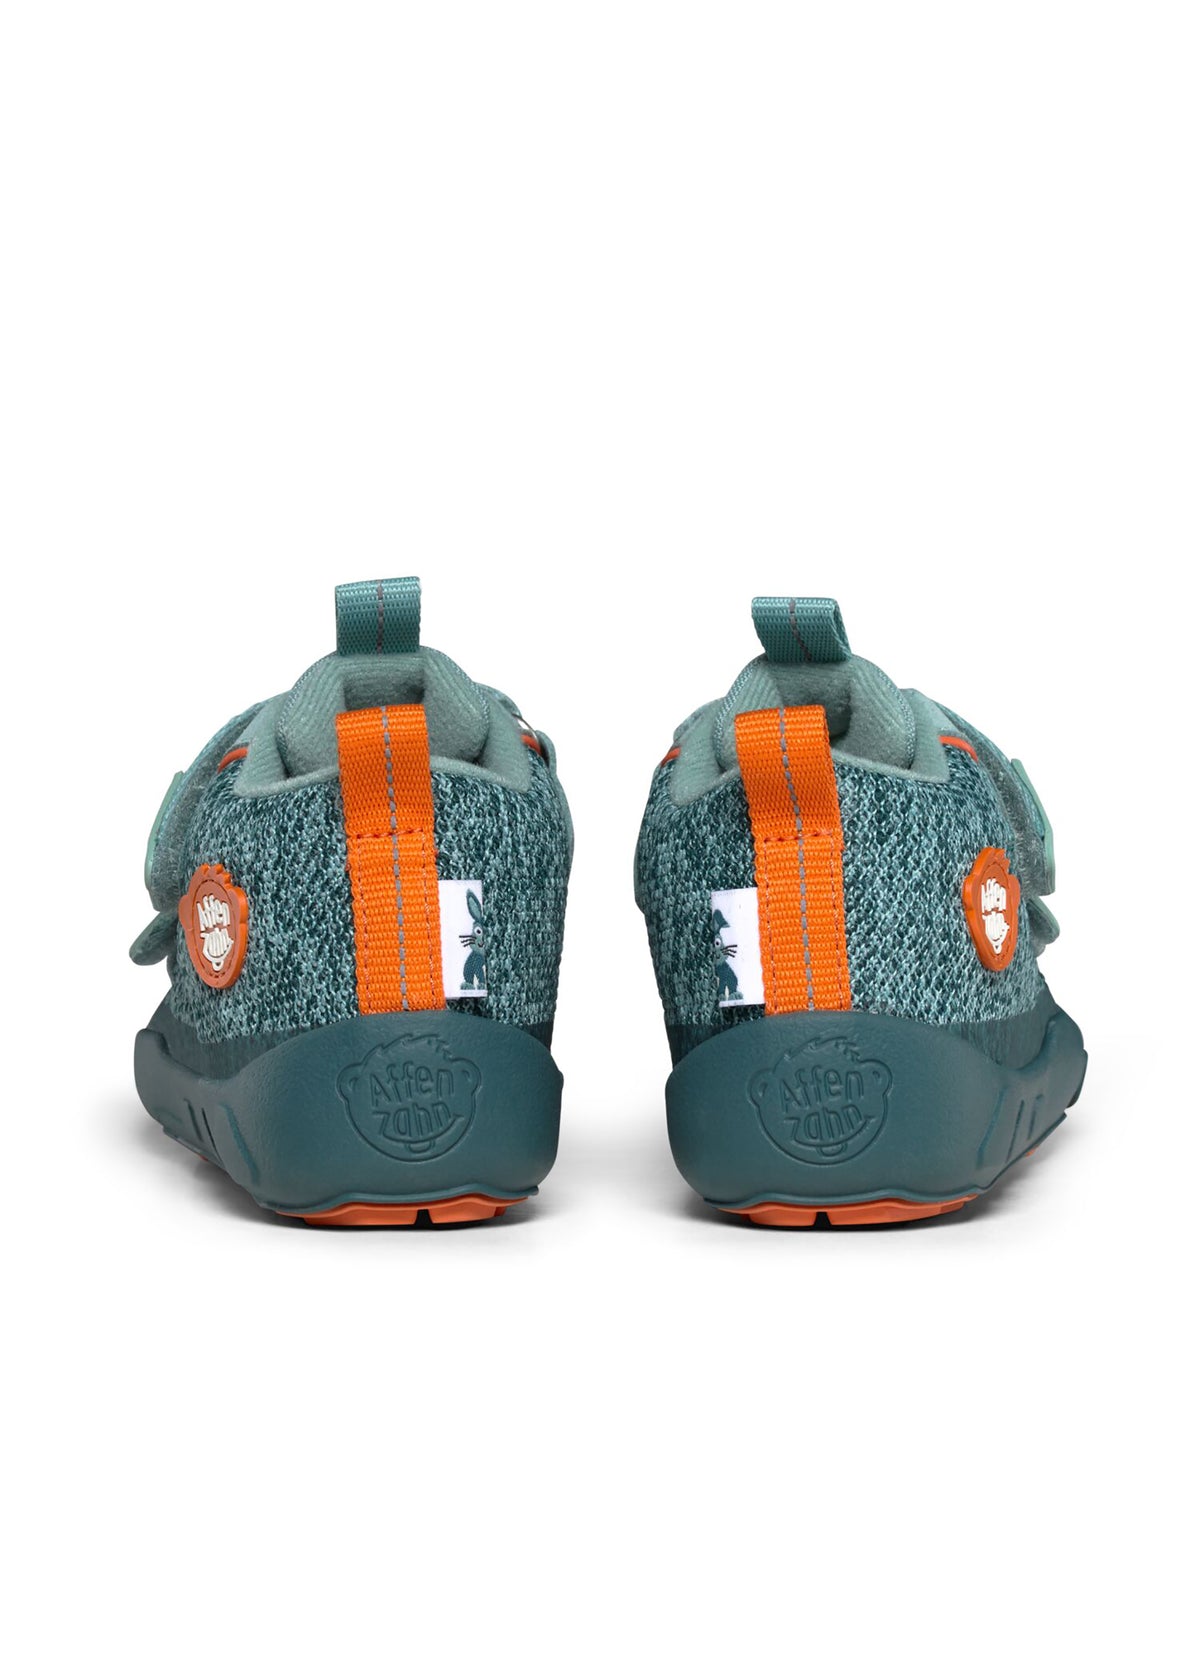 Children's barefoot shoes - Happy Knit Bunny, mid-season shoes with TEX membrane - green, orange